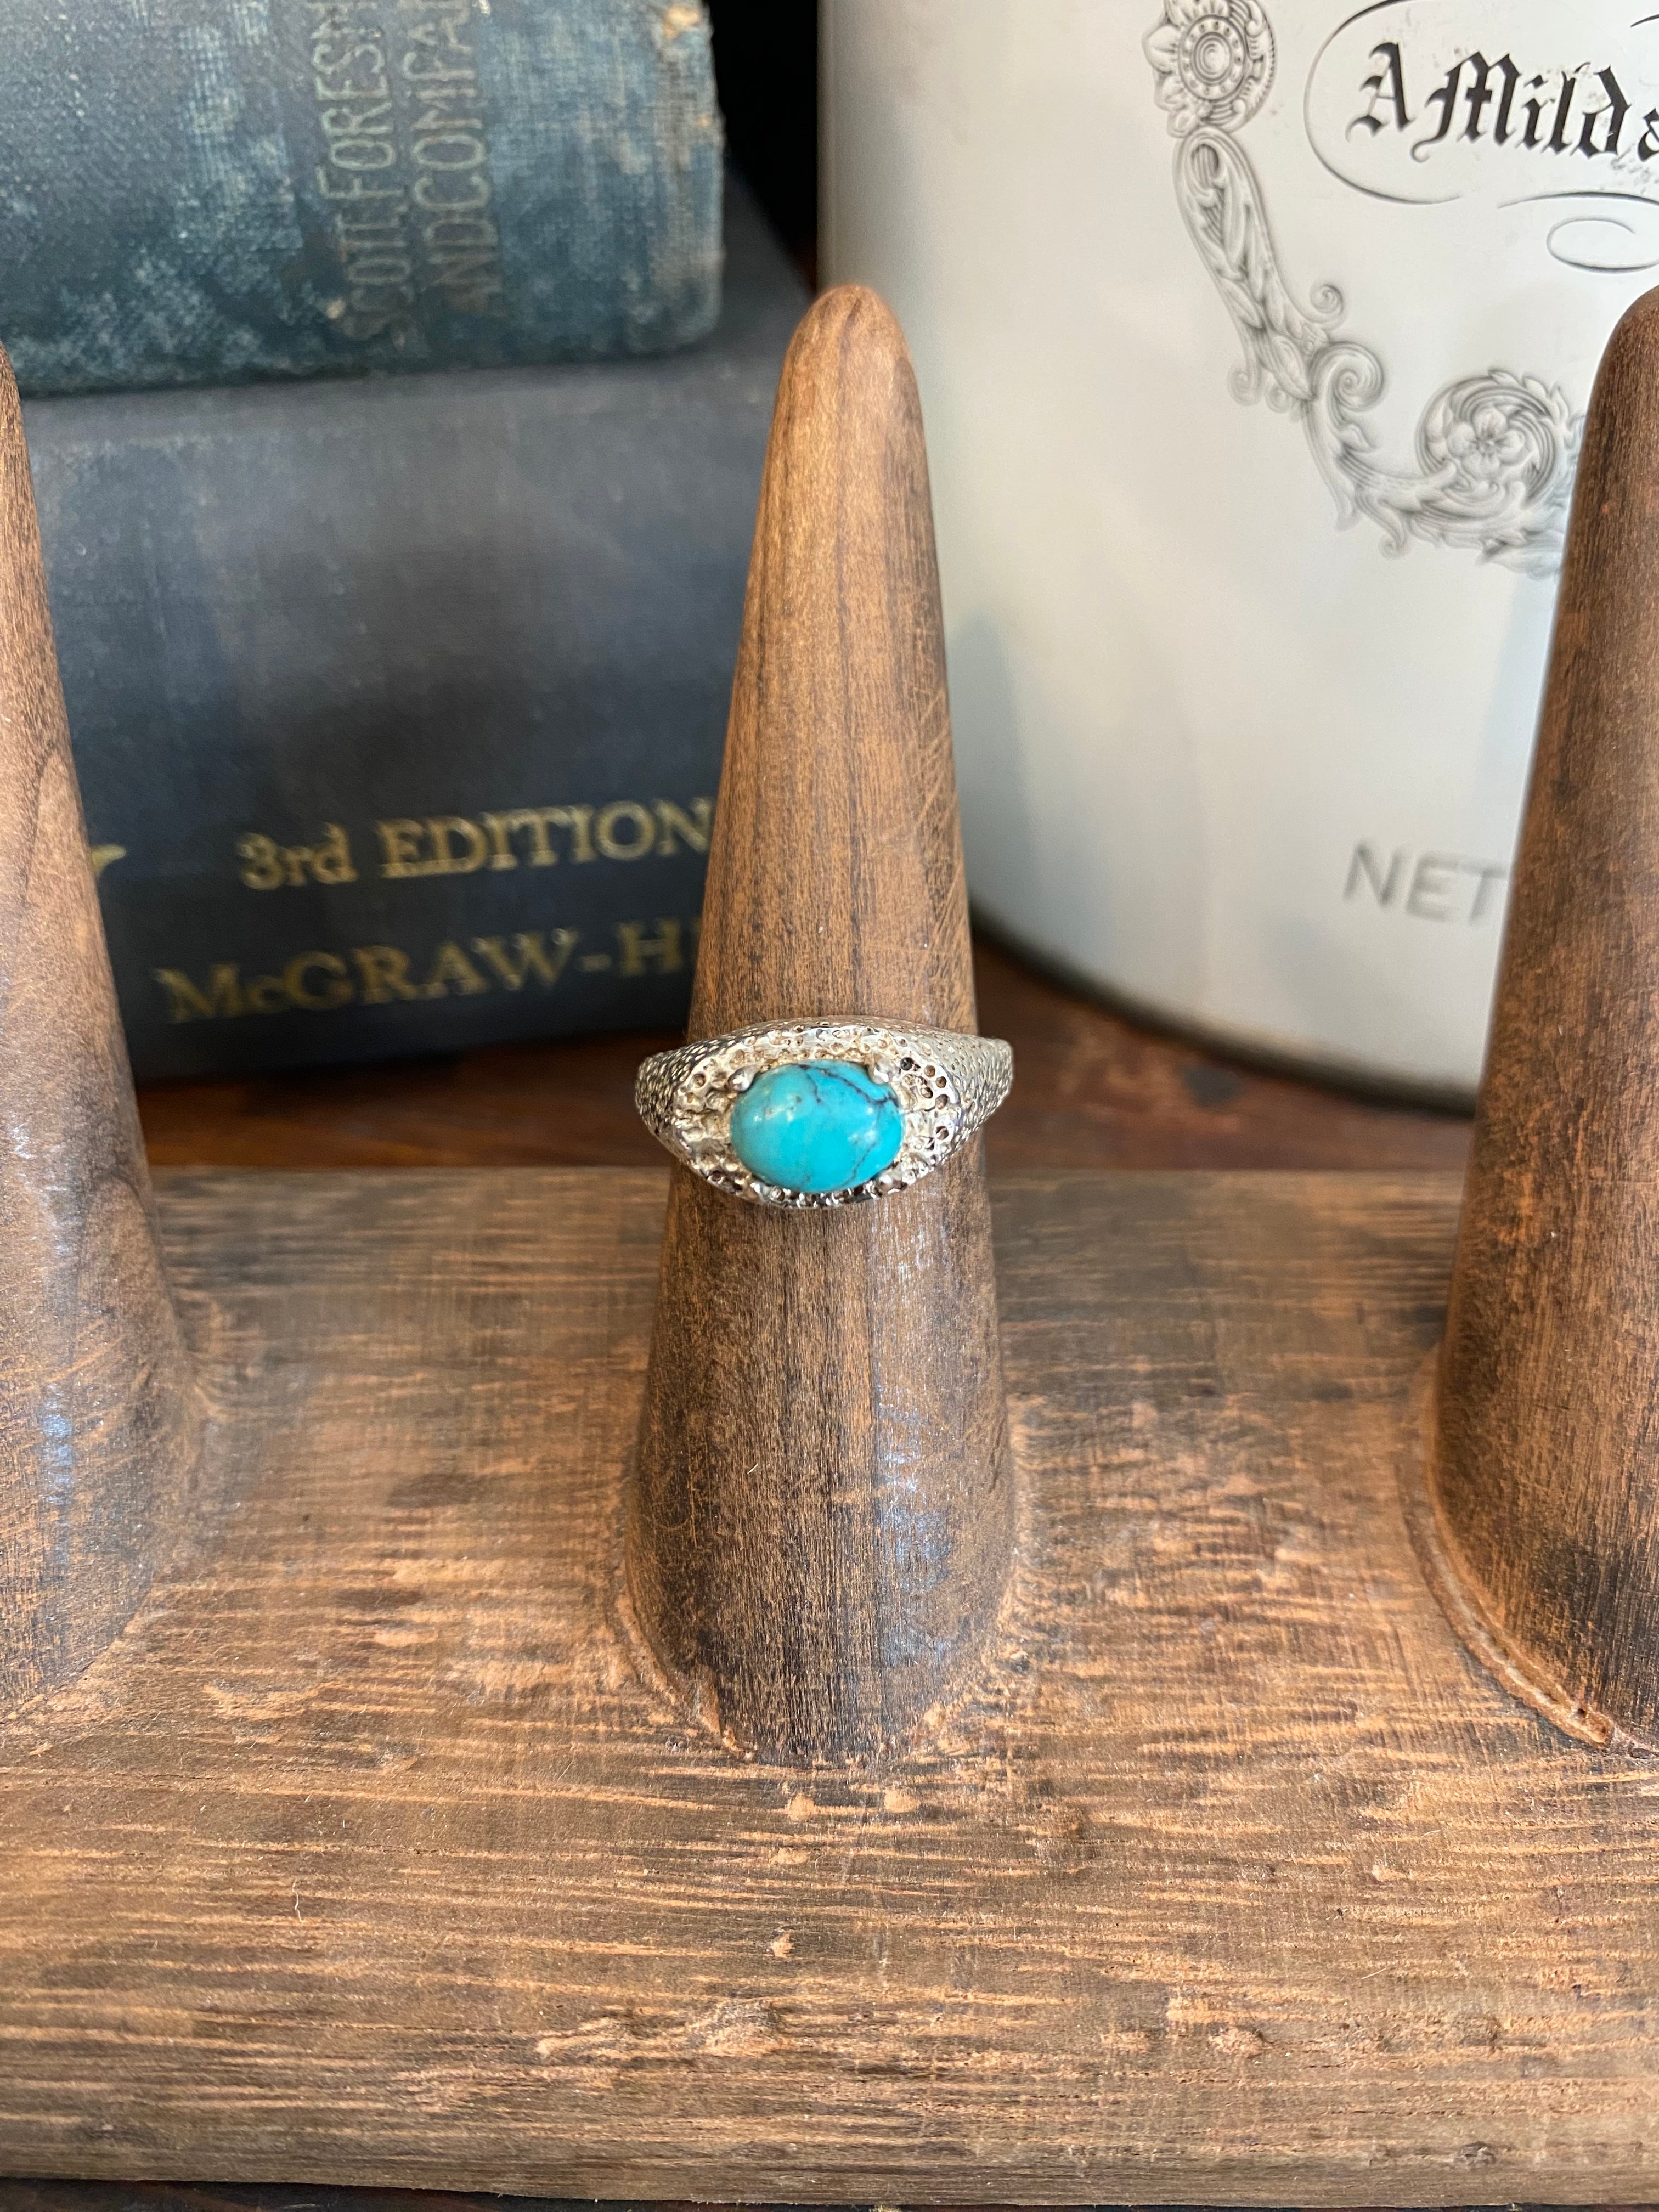 Vintage Sterling Ring With Turquoise Stone The Mustard Seed Collection, The Seed